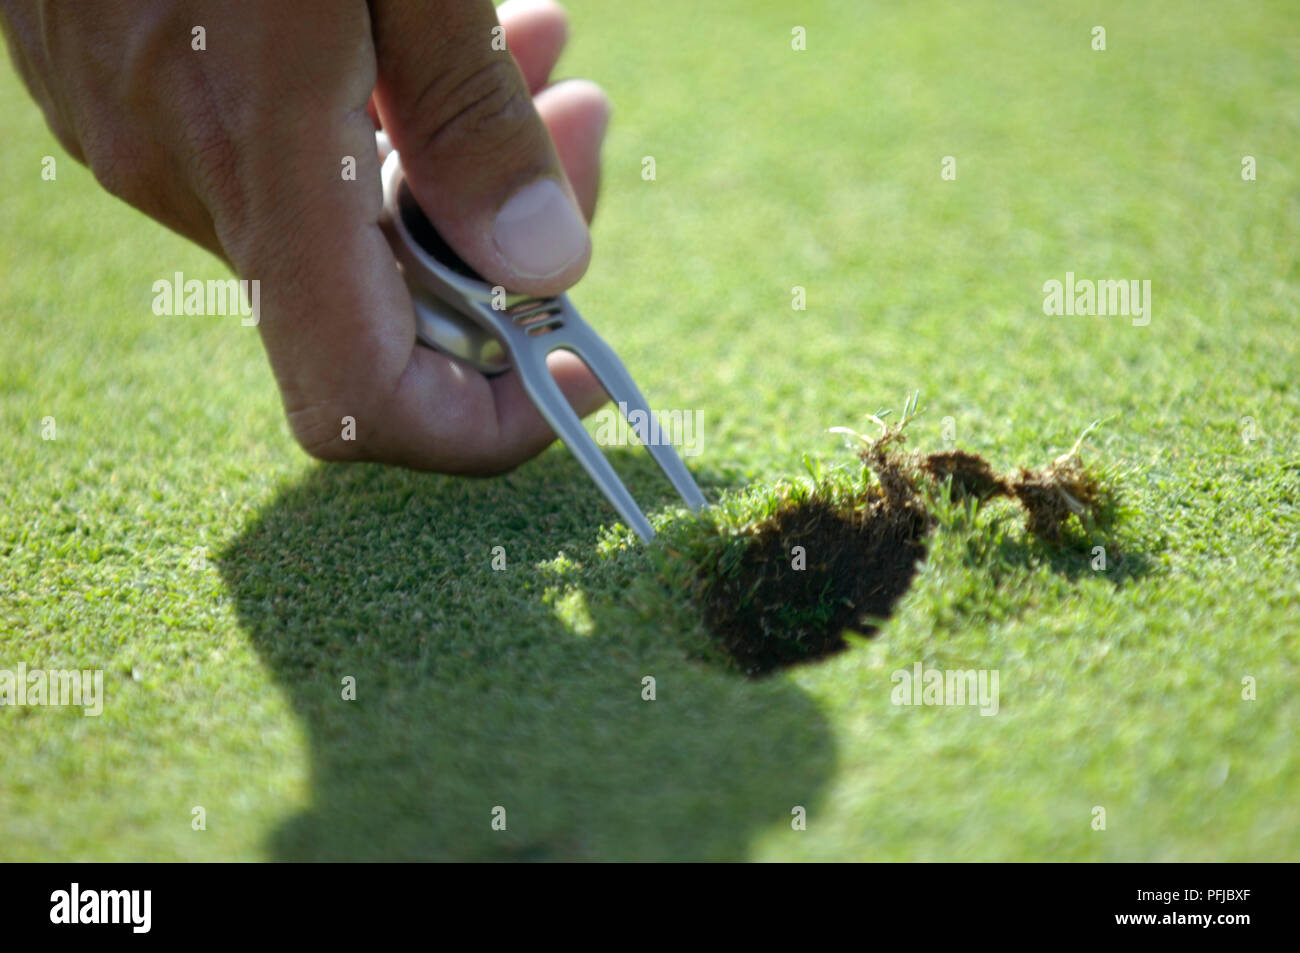 Hand using pitchmark repairer on golf course Stock Photo - Alamy